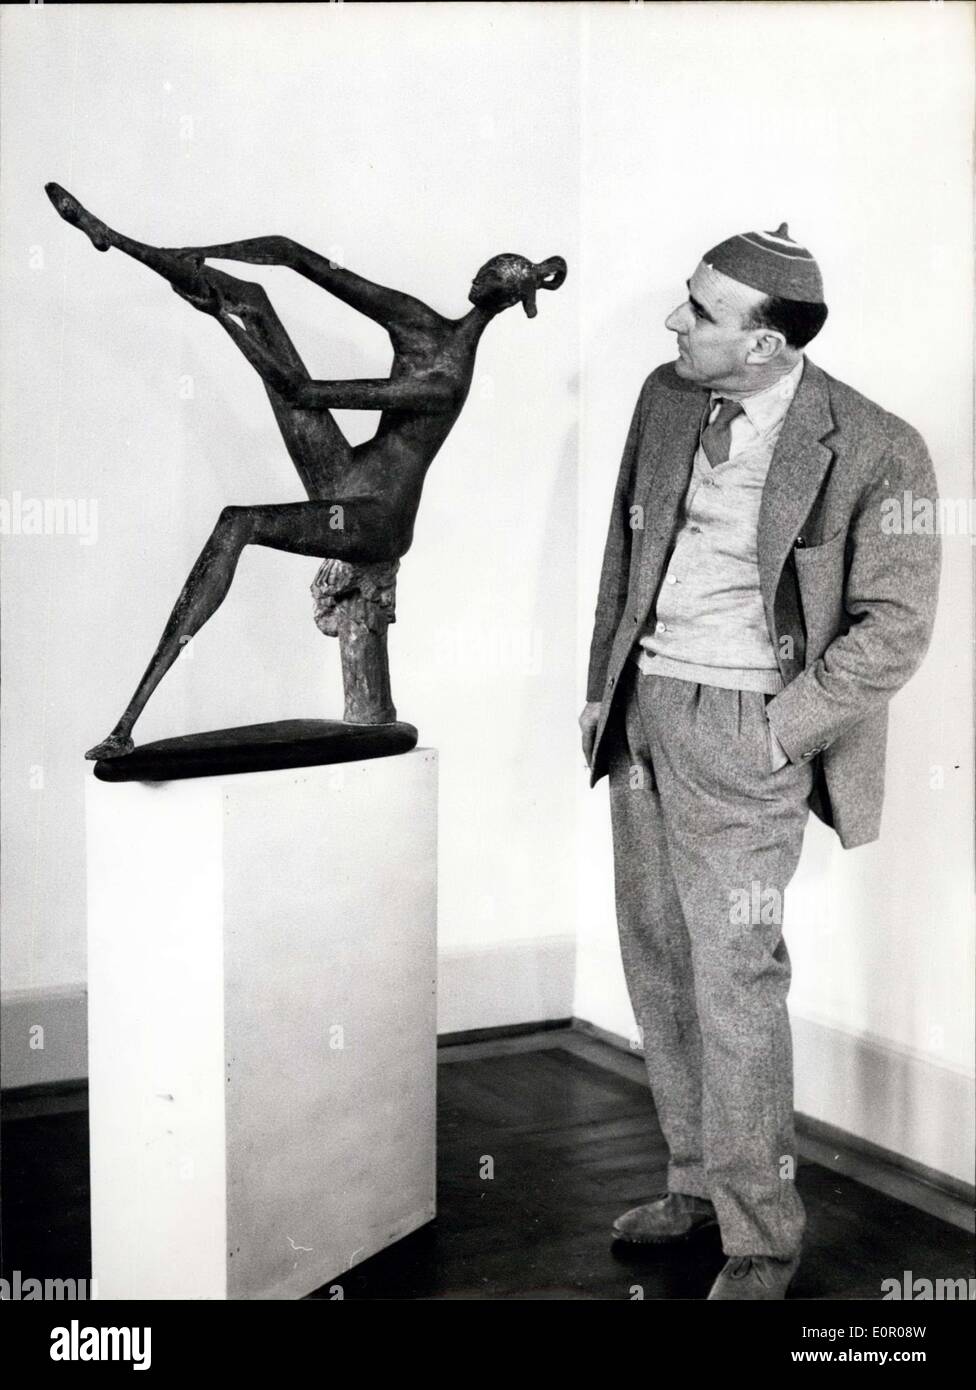 May 27, 1957 - Mascherini is looking after his sculptures, which are exhibited in the Stadtische Galerie of Munich. 30 sculptures, among them big figures from Italy, give a view of the work of the 50 year old Triestine. Photo shows Marcello Mascherini (Marcelo Mascherini) in front of his sculpture ''The Bathing' Stock Photo